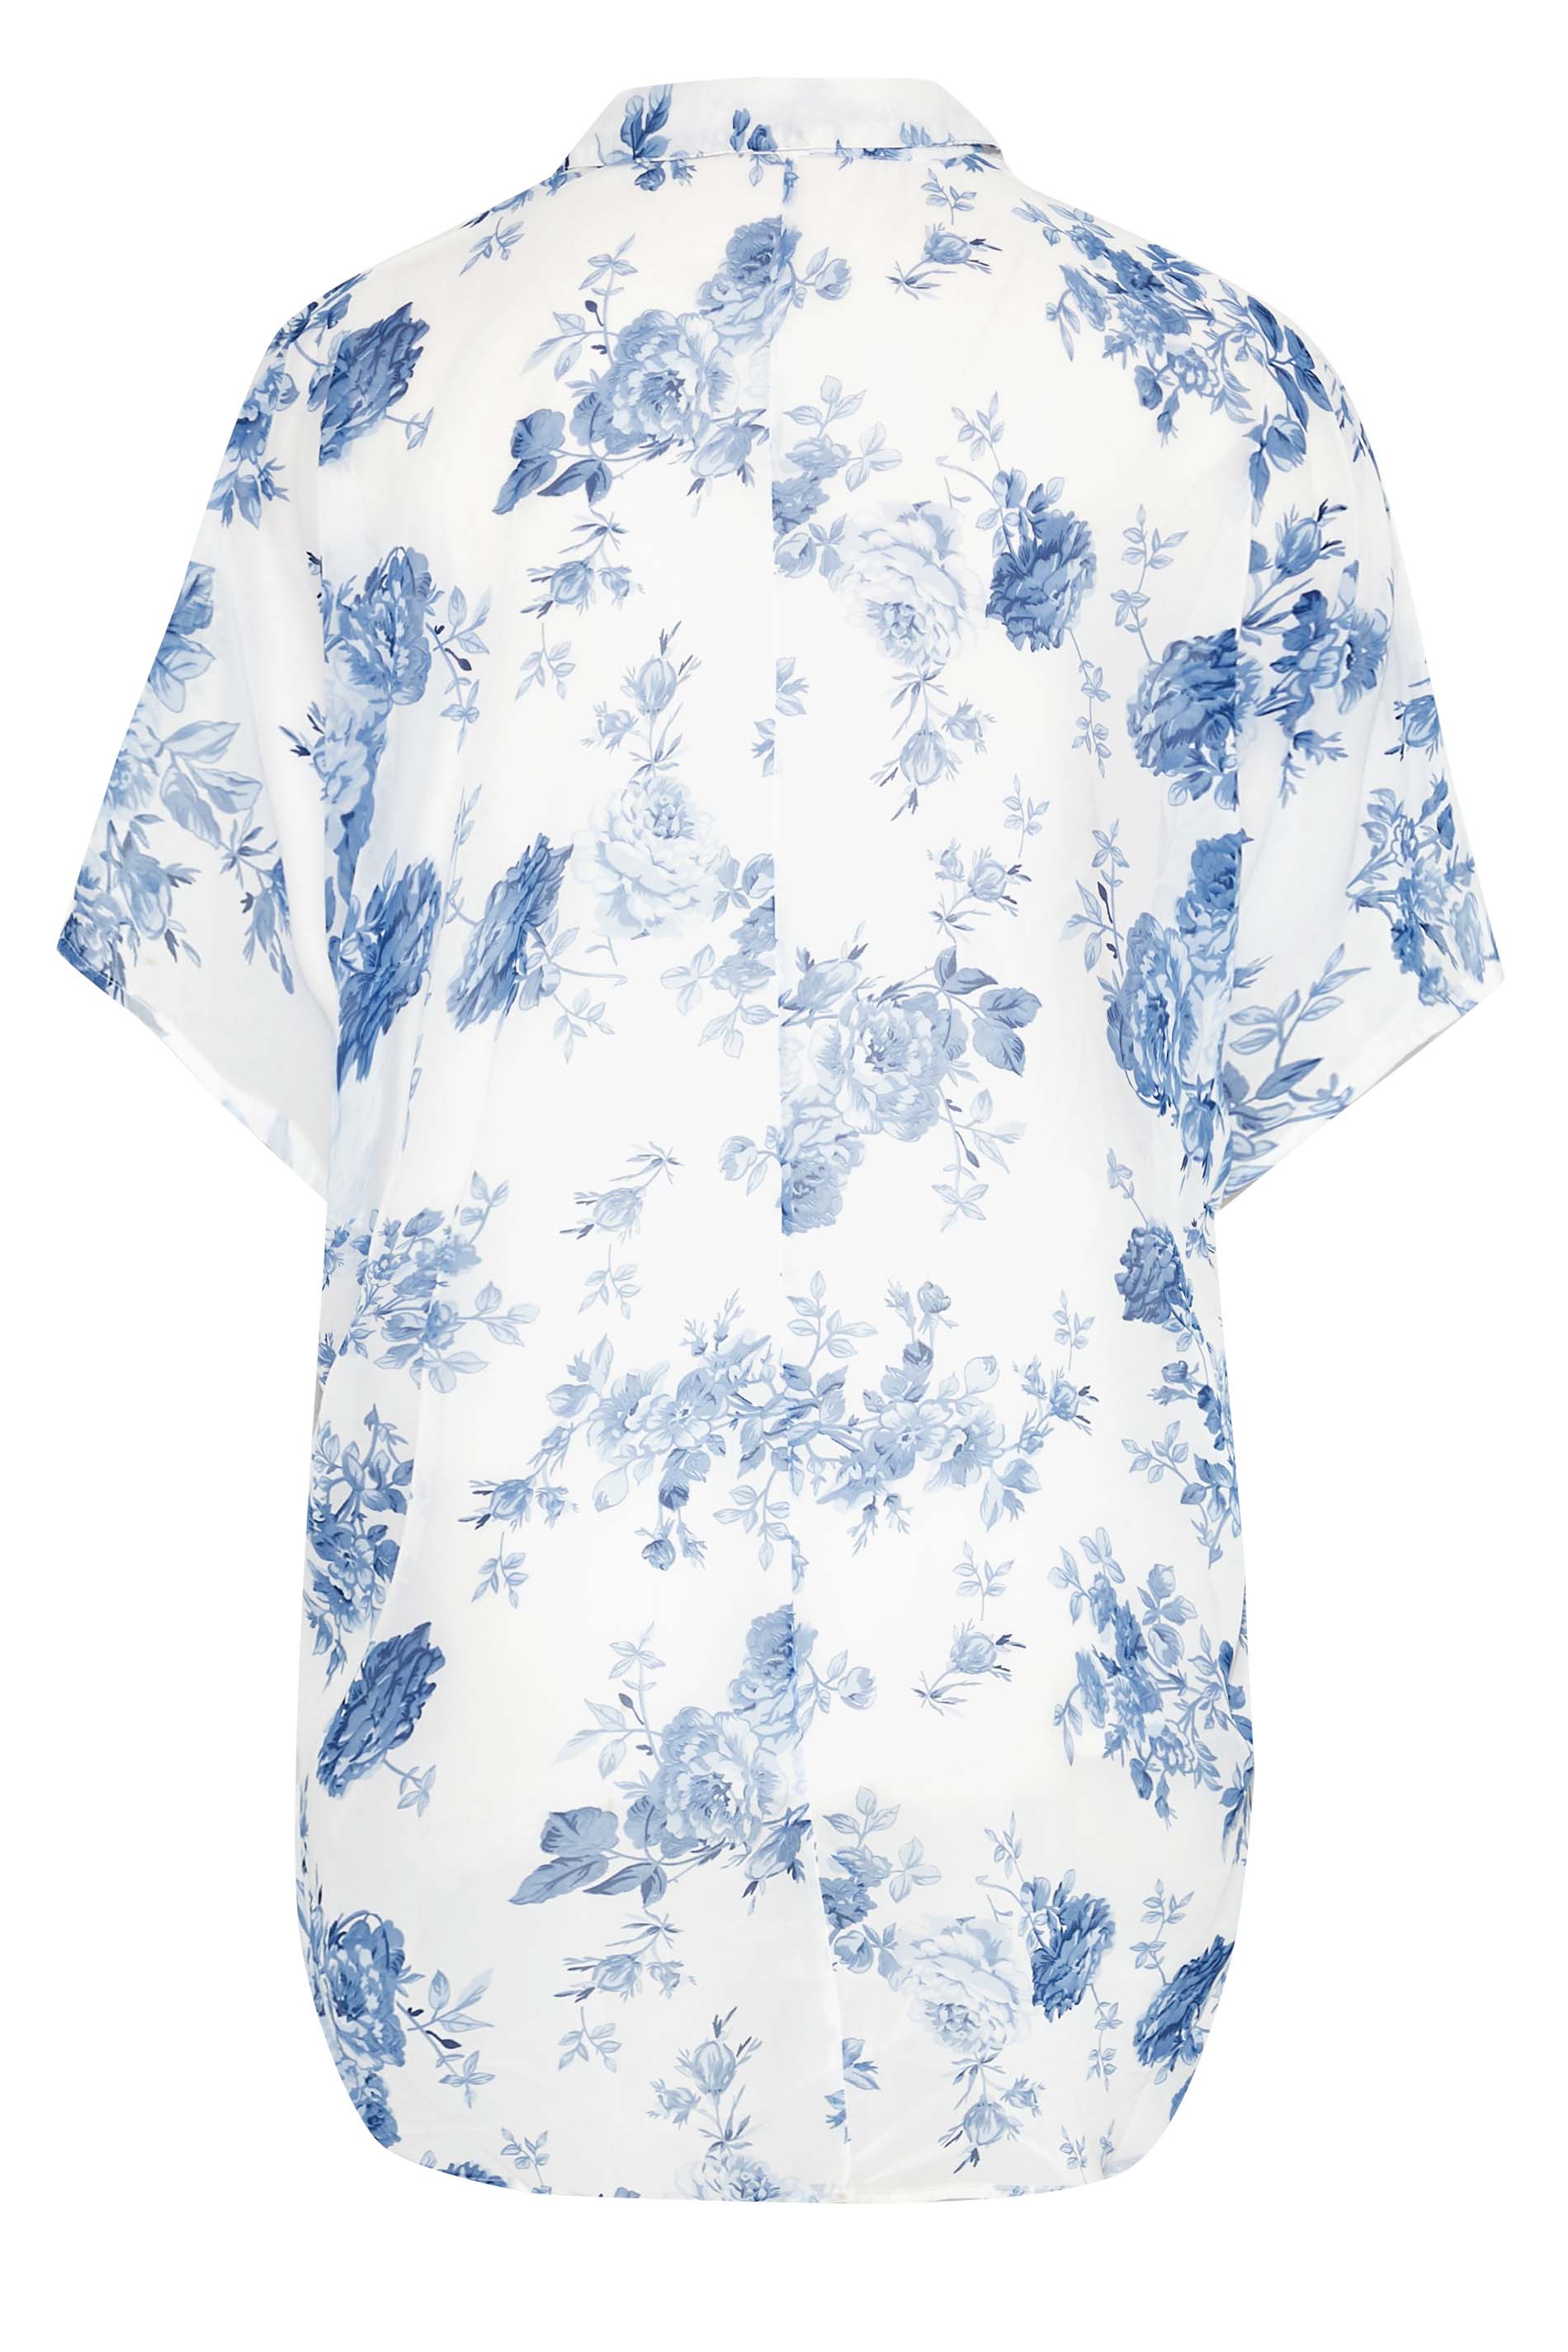 Grande taille  Blouses & Chemisiers Grande taille  Chemisiers | Curve Blue Floral Print Batwing Shirt - ZO73044